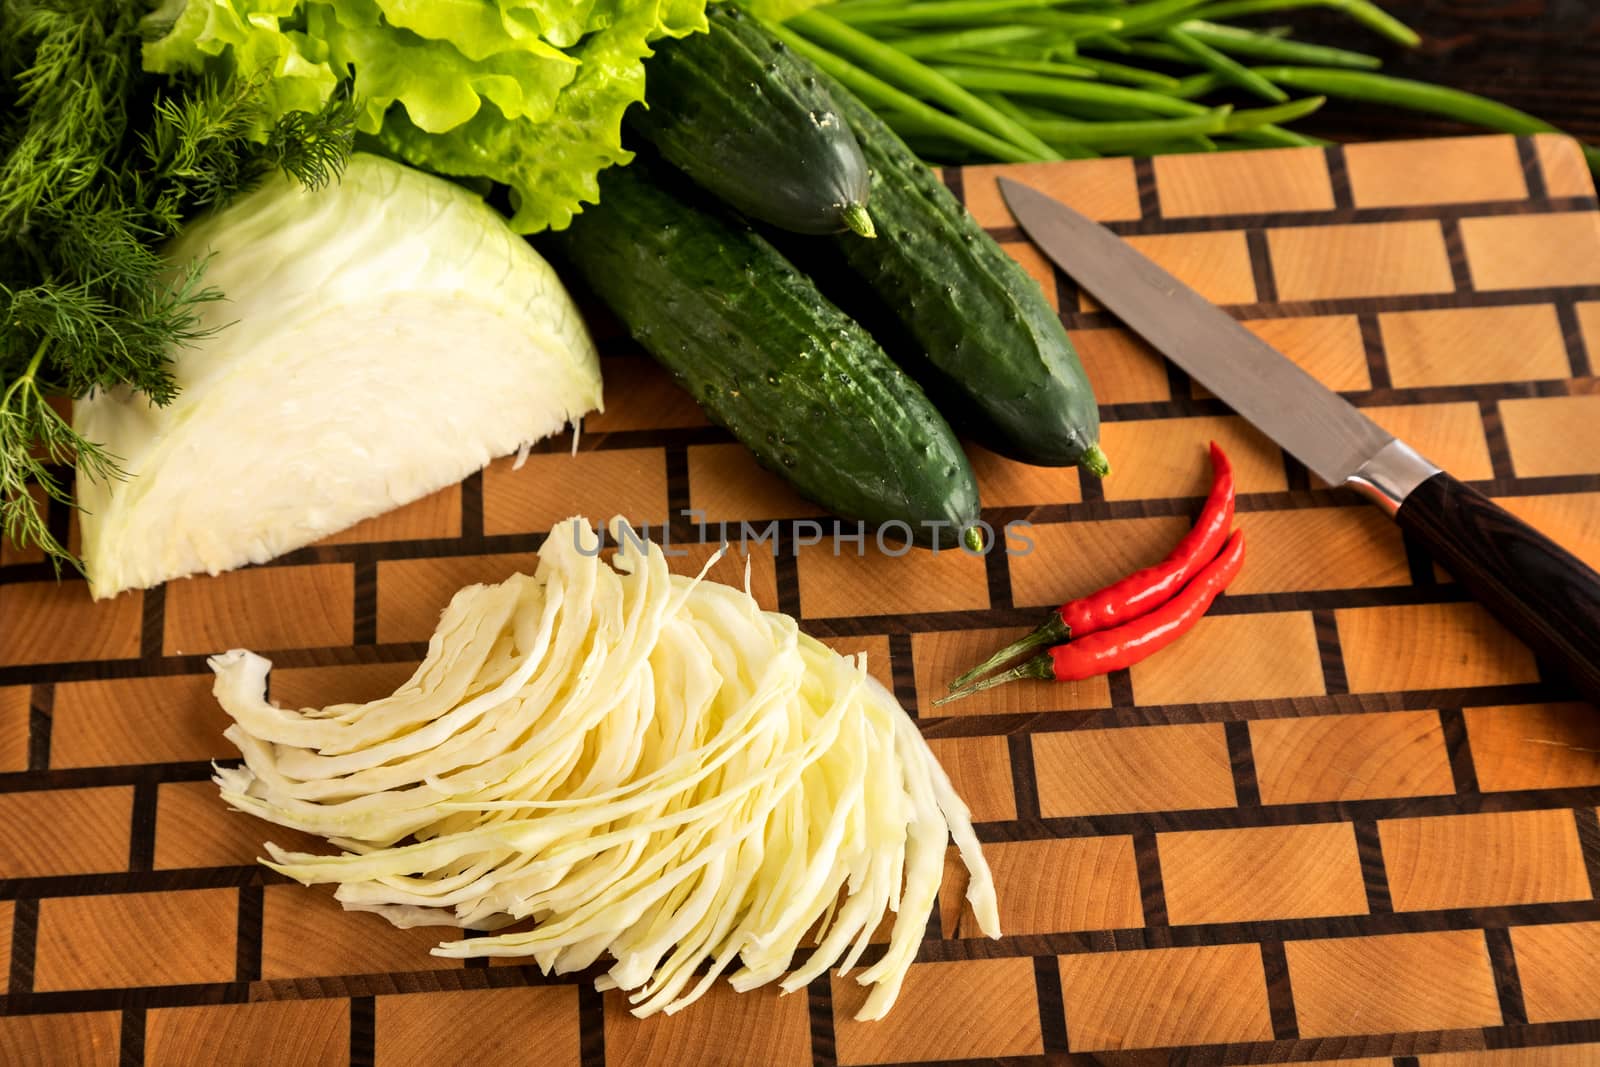 Knife vegetables and spices on a wooden cutting board